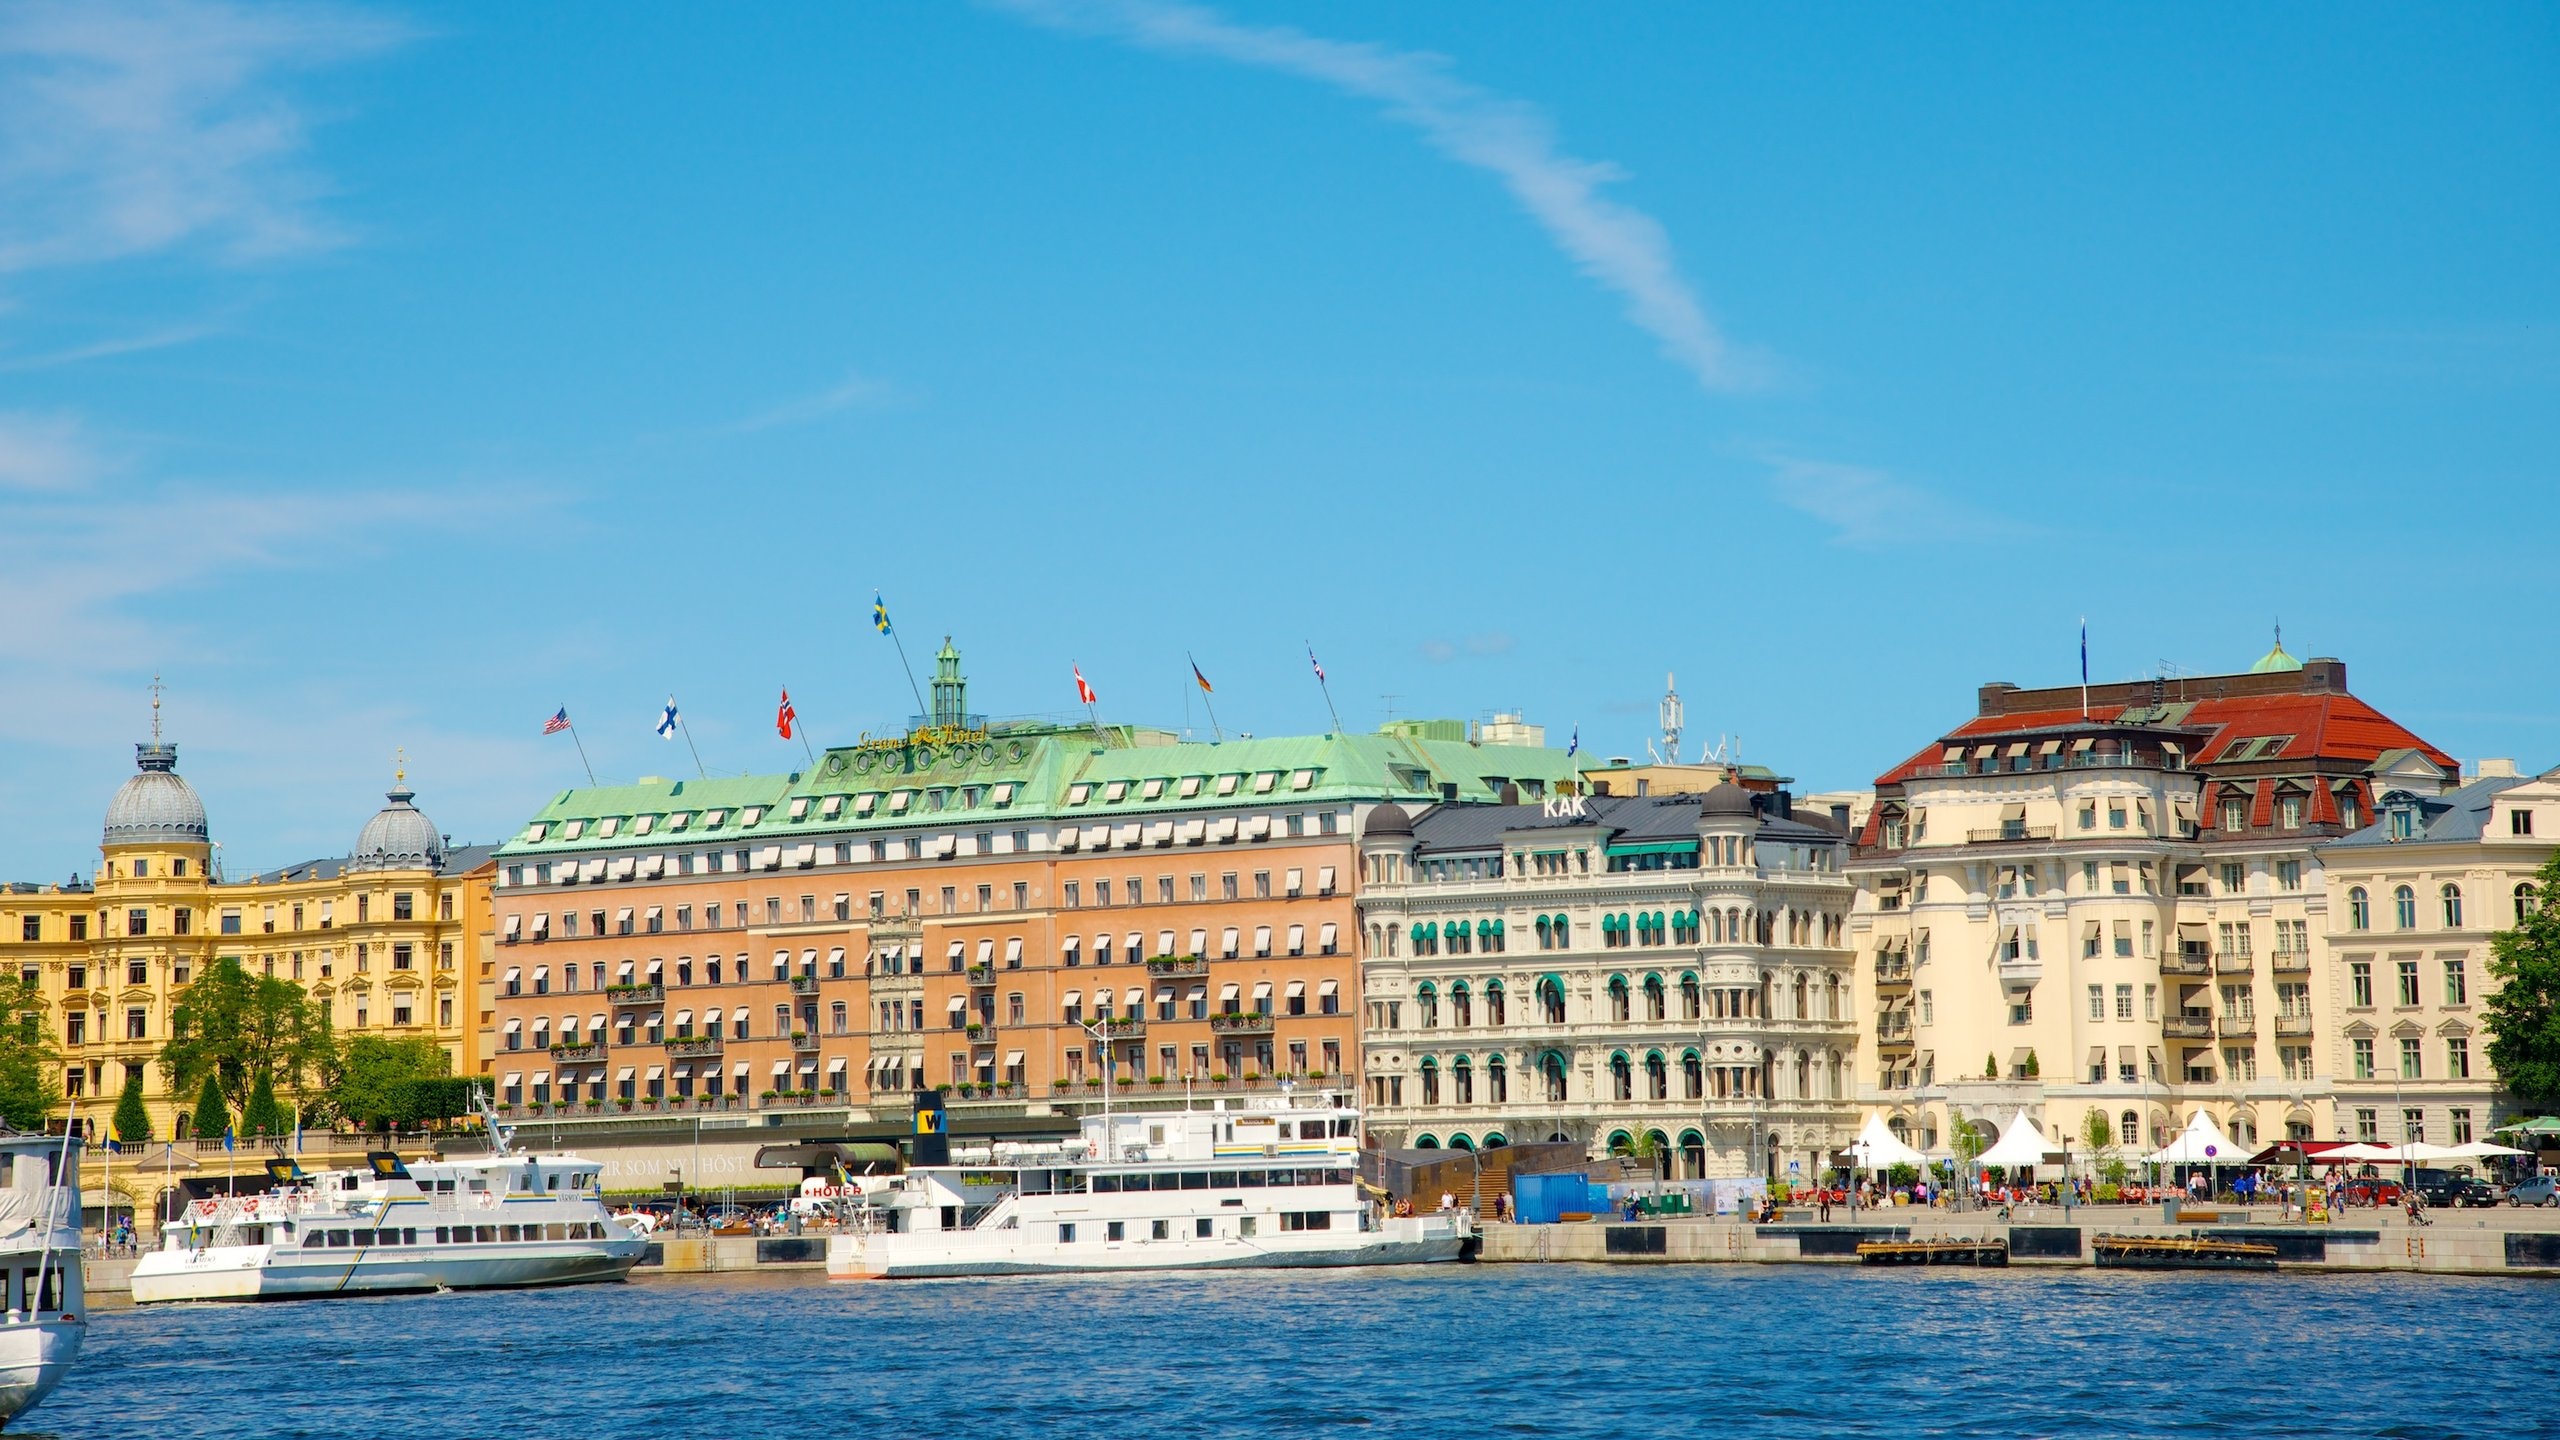 Stockholm visit, Best of tourism, Travel guide, Places to see, 2560x1440 HD Desktop